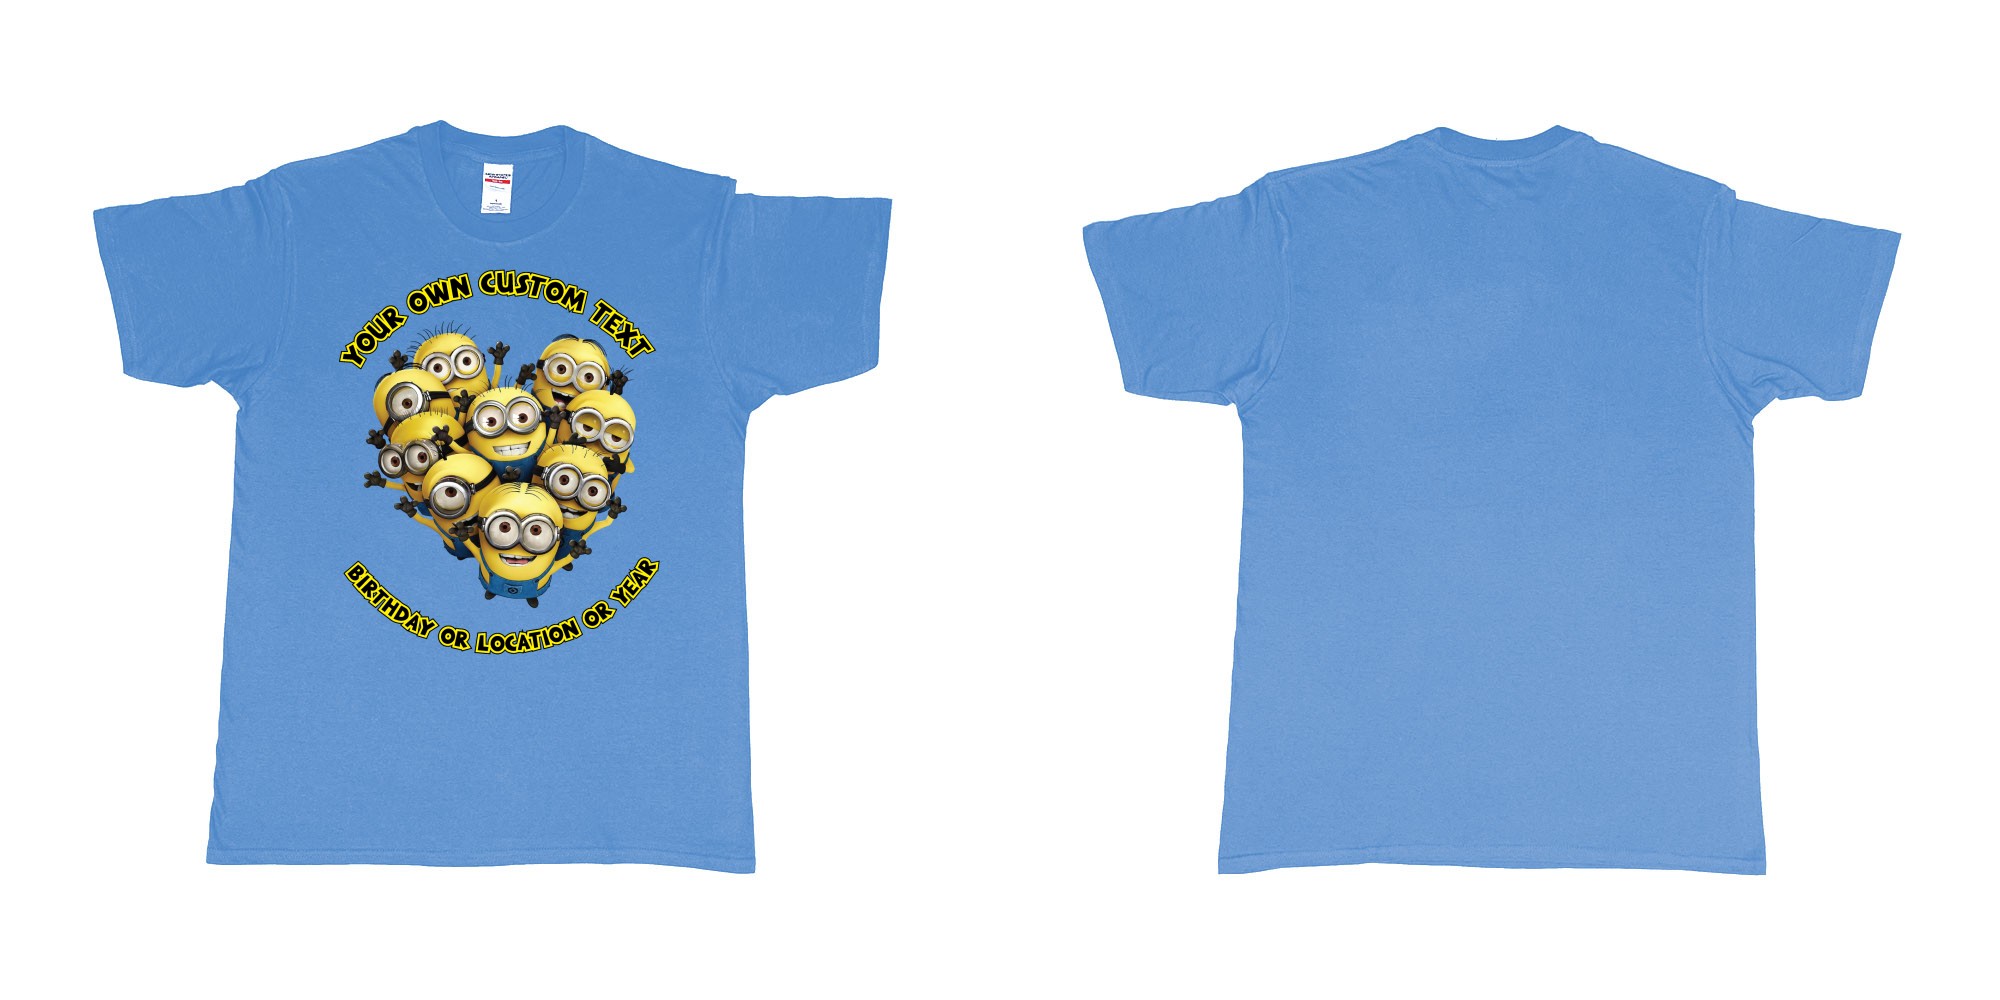 Custom tshirt design minions celebrating you in fabric color carolina-blue choice your own text made in Bali by The Pirate Way